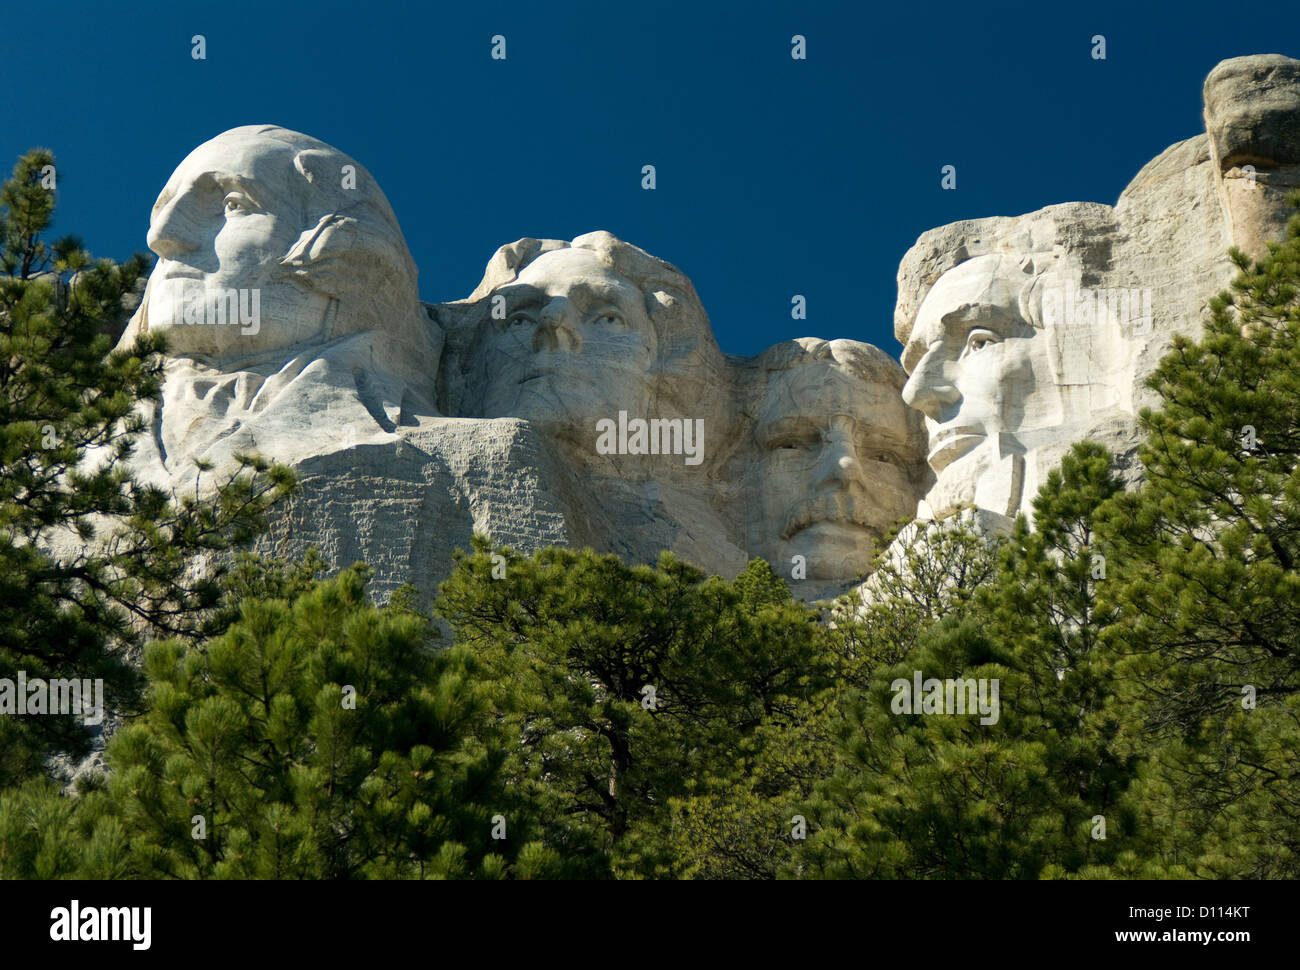 Who are the four faces of Mt. Rushmore?